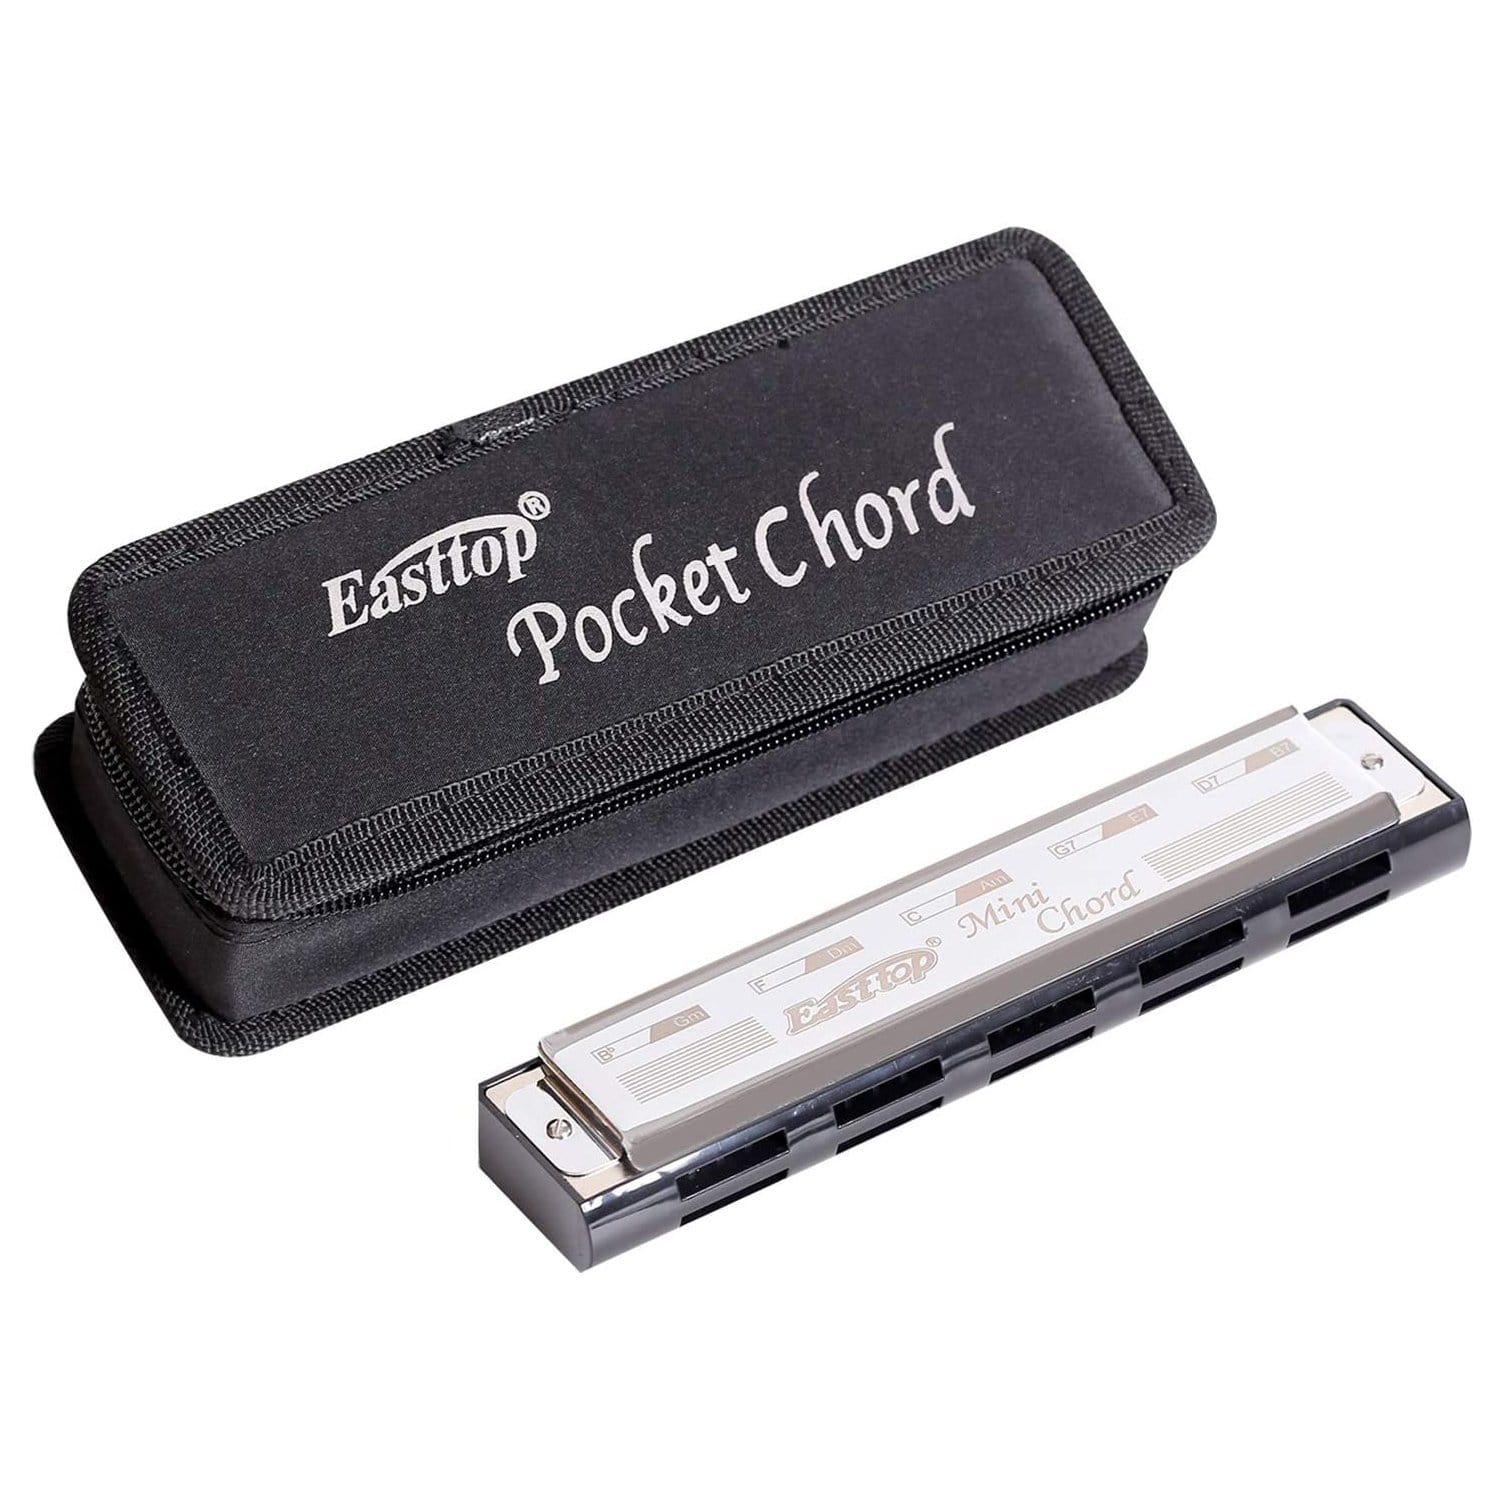 East top Professional Mini Chord Harmonica, Orchestral harmonica for Adults, Band Players and Students - Easttop harmonica